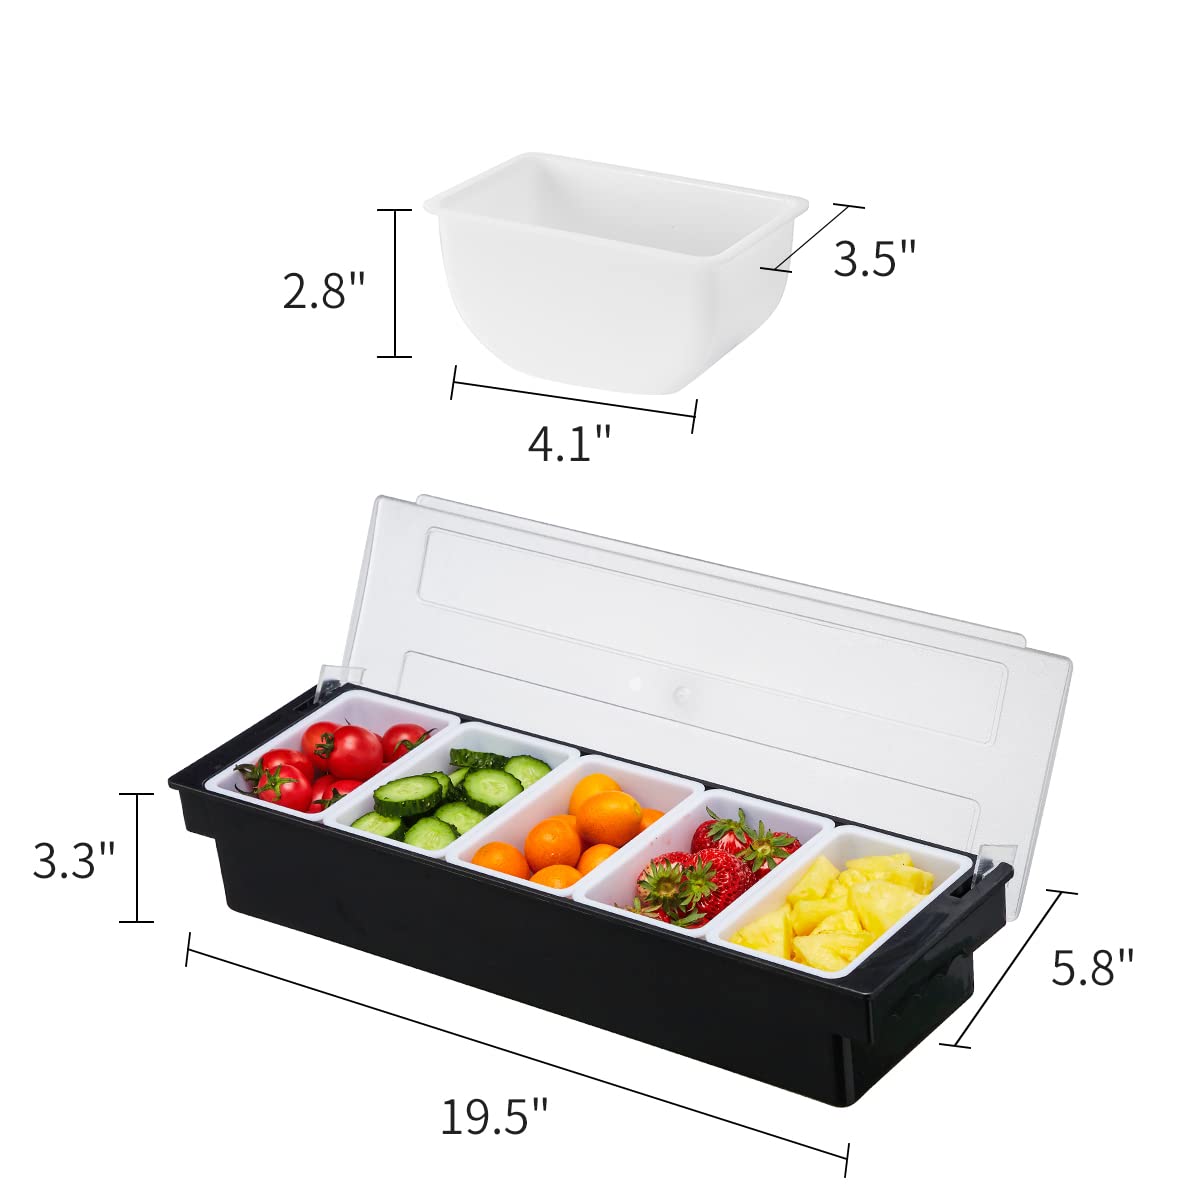 MUKEEN Ice Cooled Condiment Serving Container-6 Compartment Chilled Garnish Tray Bar Caddy with Hinged Lid (6 Compartments)